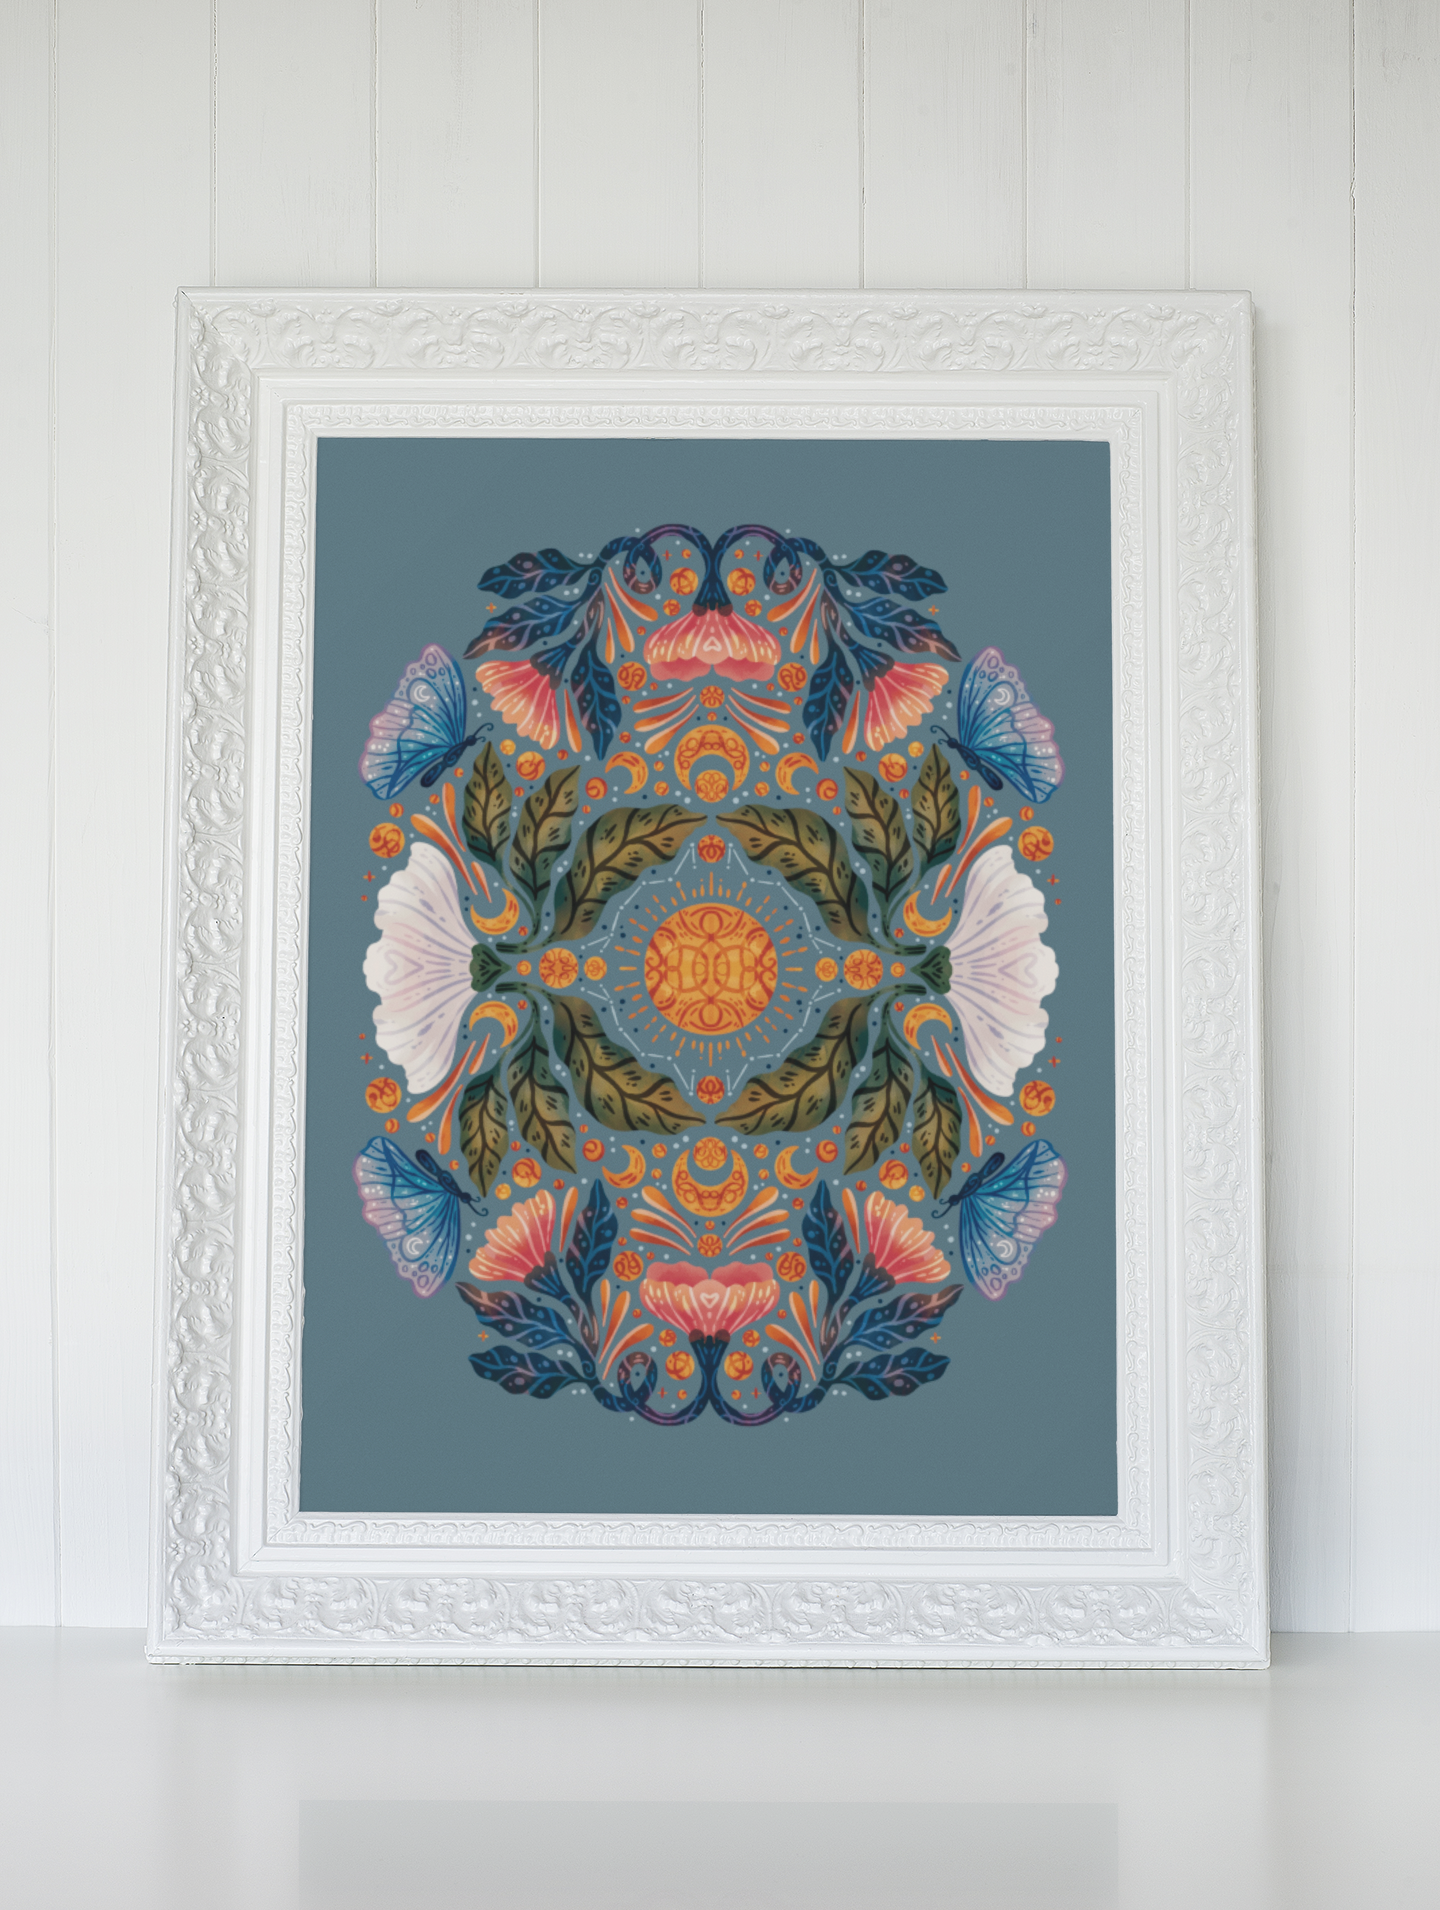 a cross stitch pattern in a white frame is hanging on a wall .